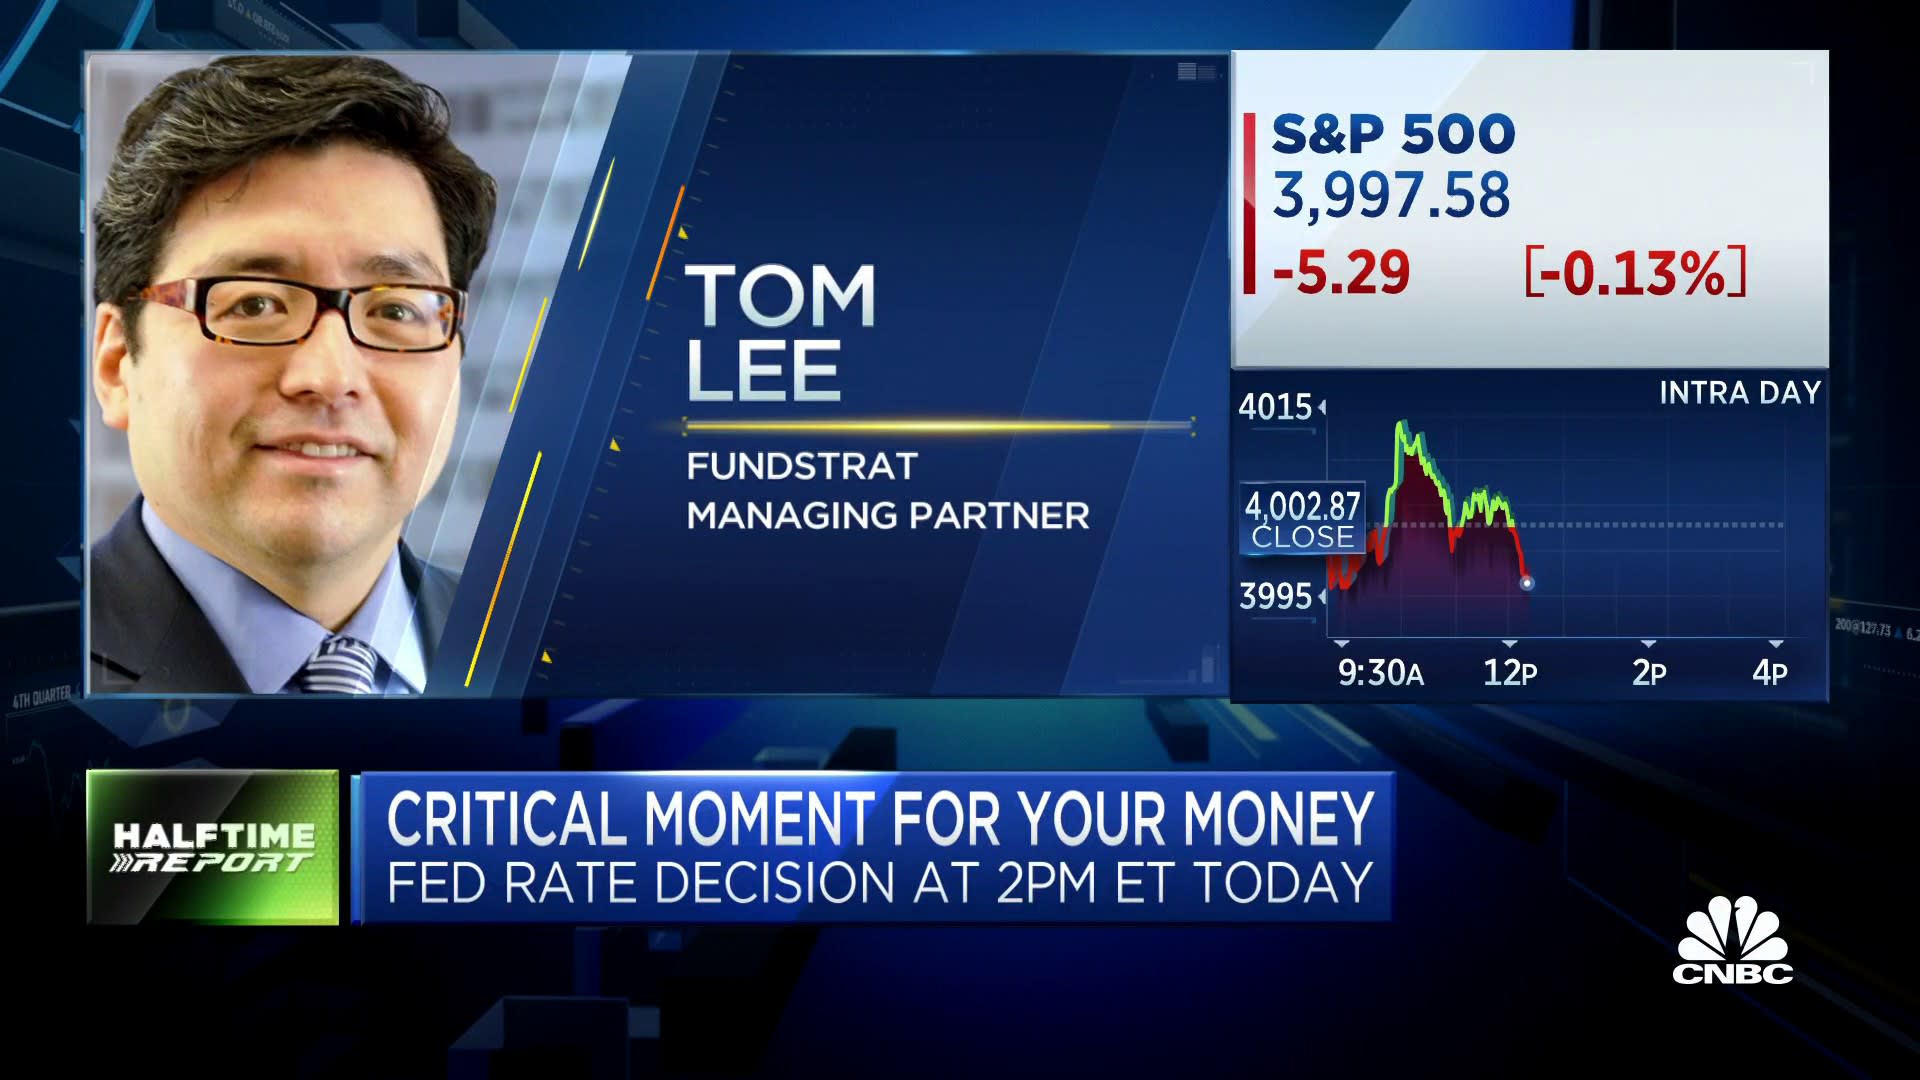 If the Fed tightens further, this banking crisis could fuel more panic,  says Fundstrat's Tom Lee